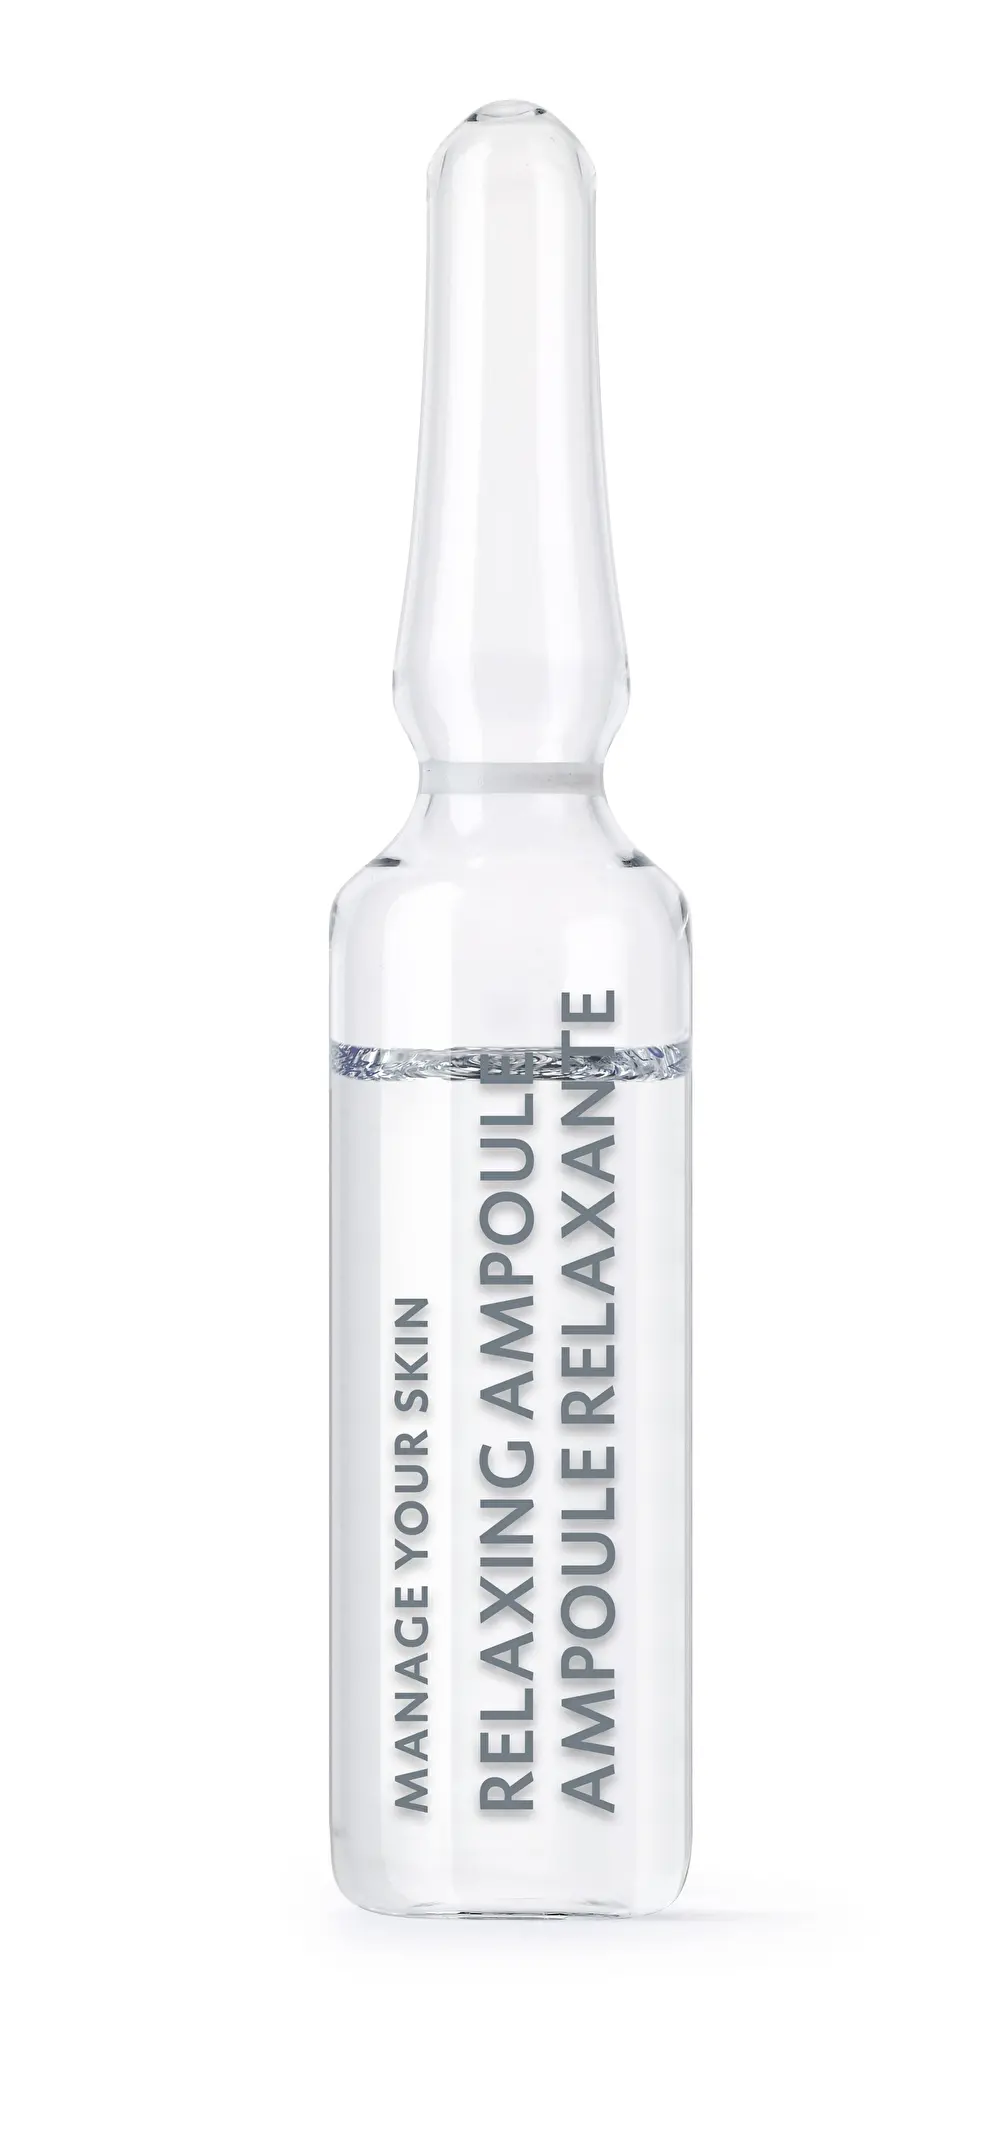 Relaxing ampoule